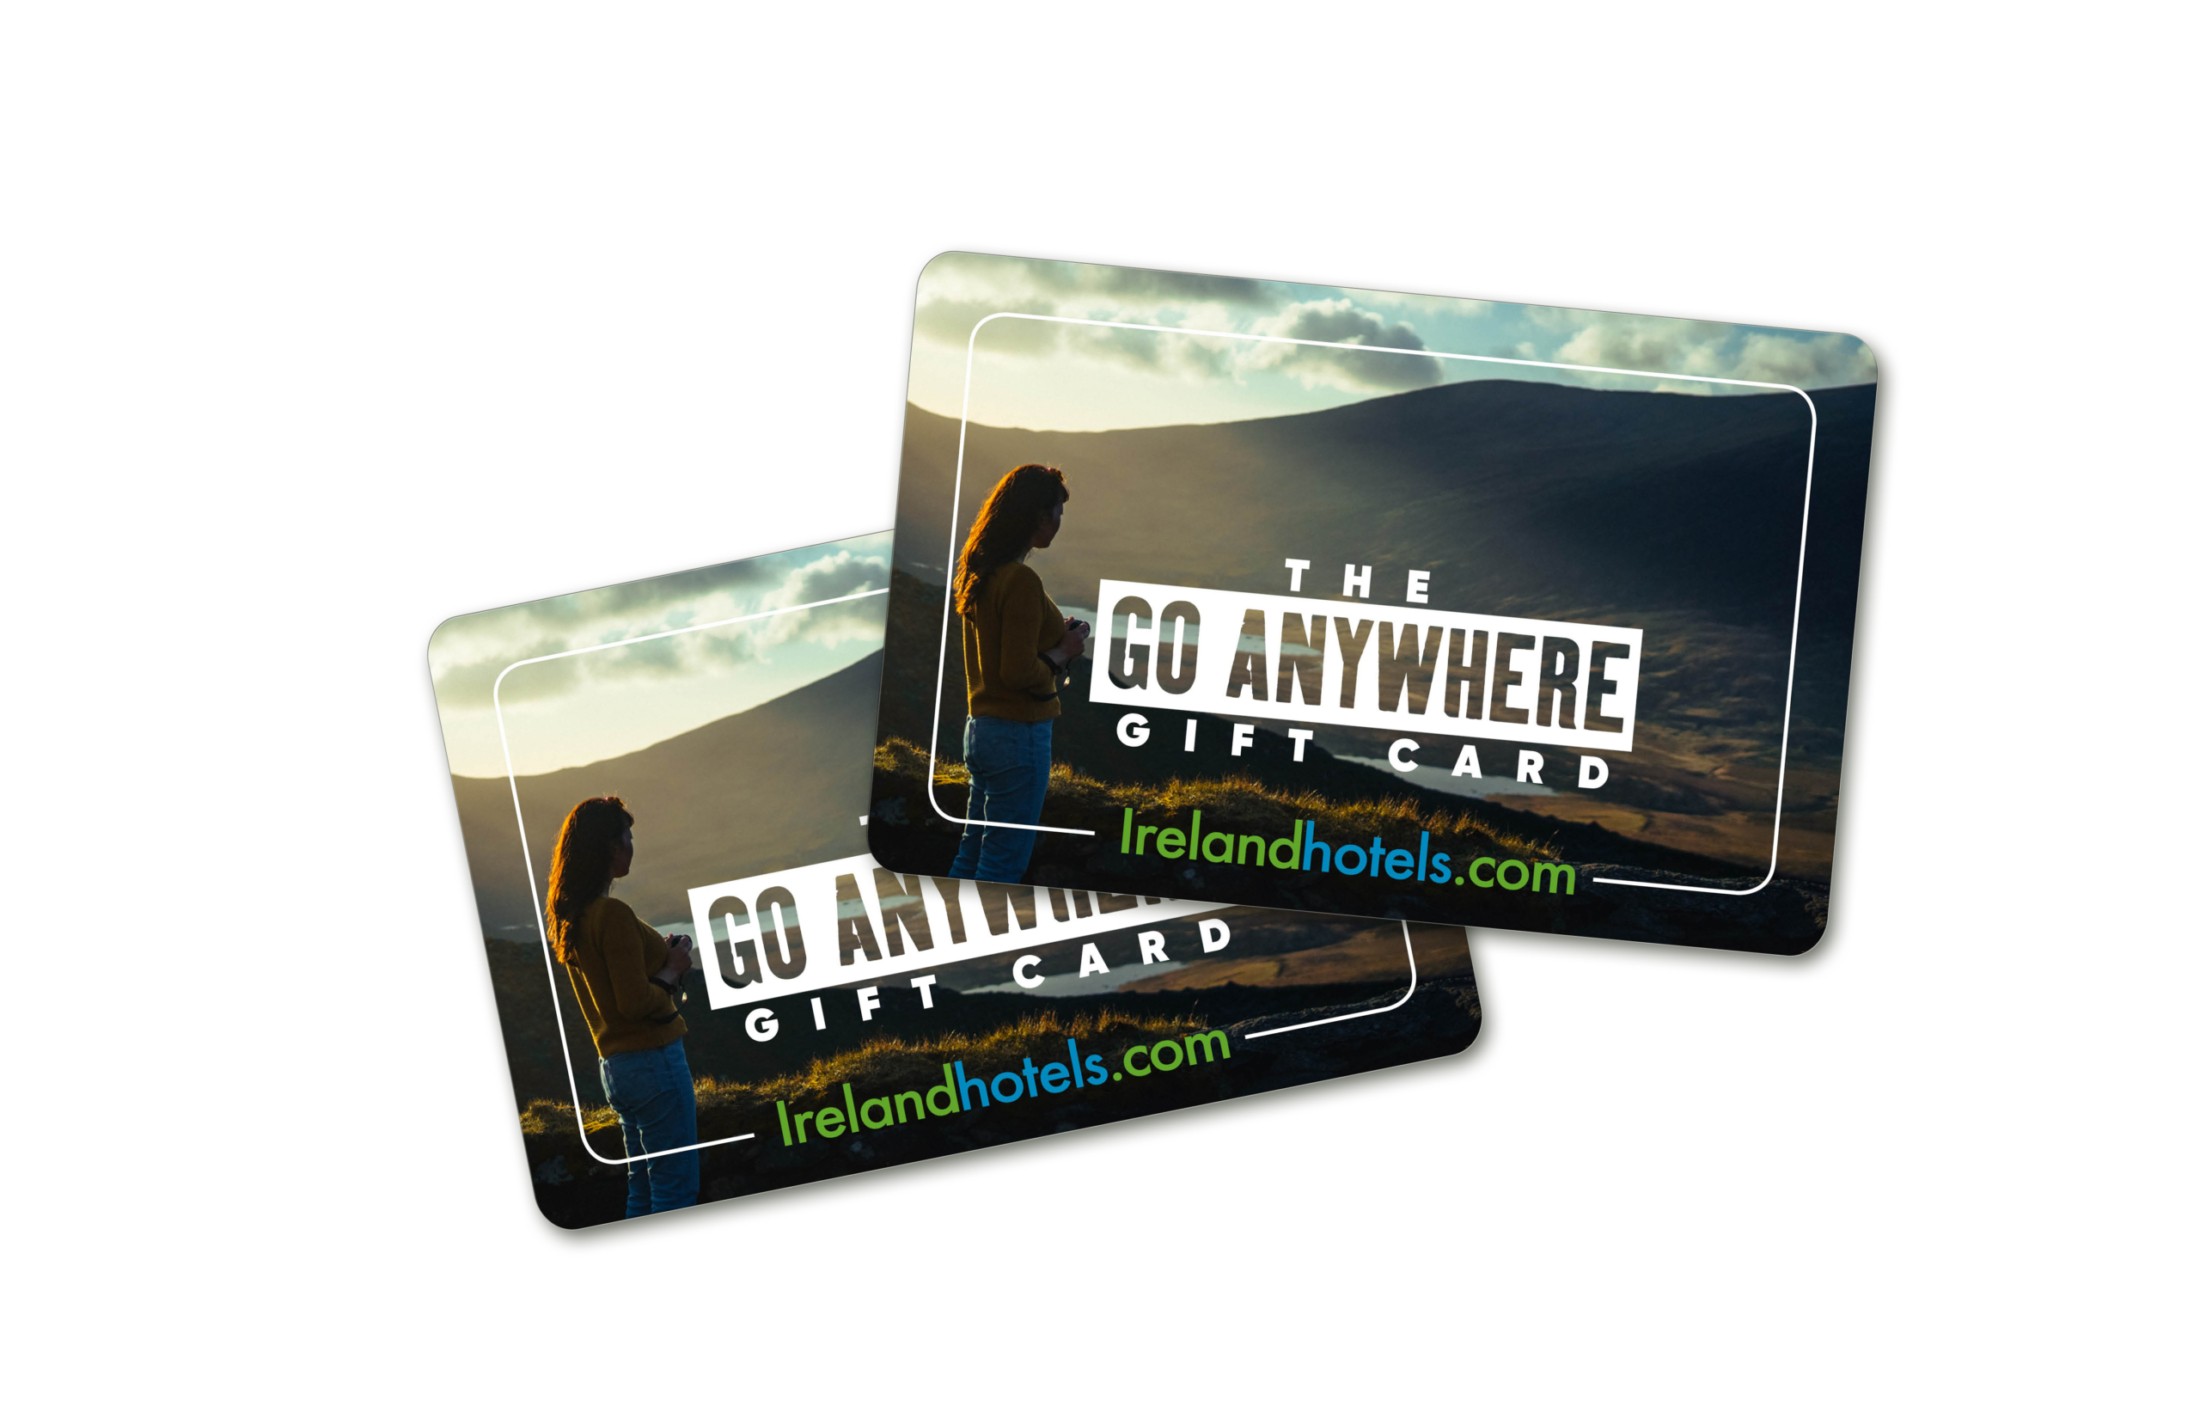 Go Anywhere” gift card - Hotel and Catering Review